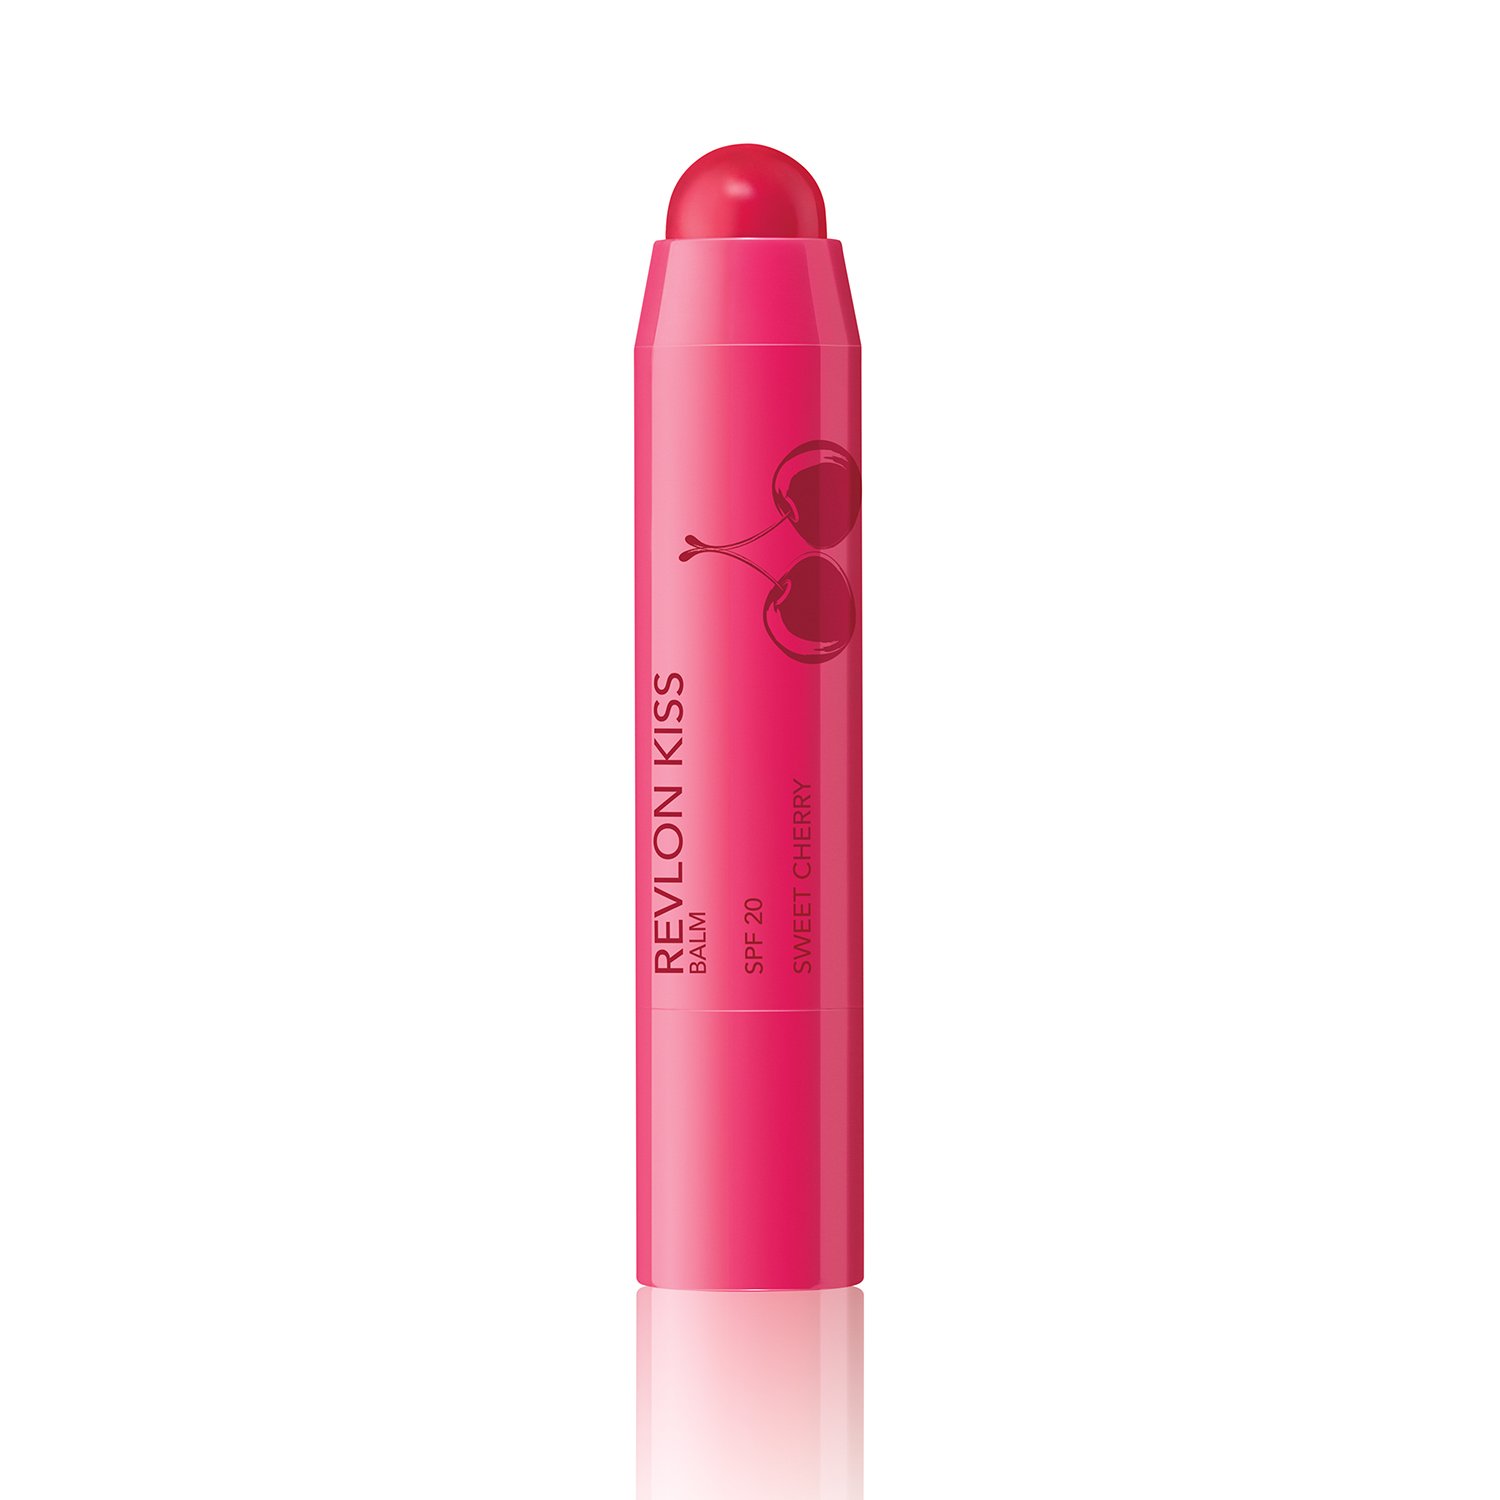 Revlon Lip Balm, Kiss Tinted Lip Balm, Face Makeup with Lasting Hydration, SPF 20, Infused with Natural Fruit Oils, 030 Sweet Cherry, 0.09 Oz